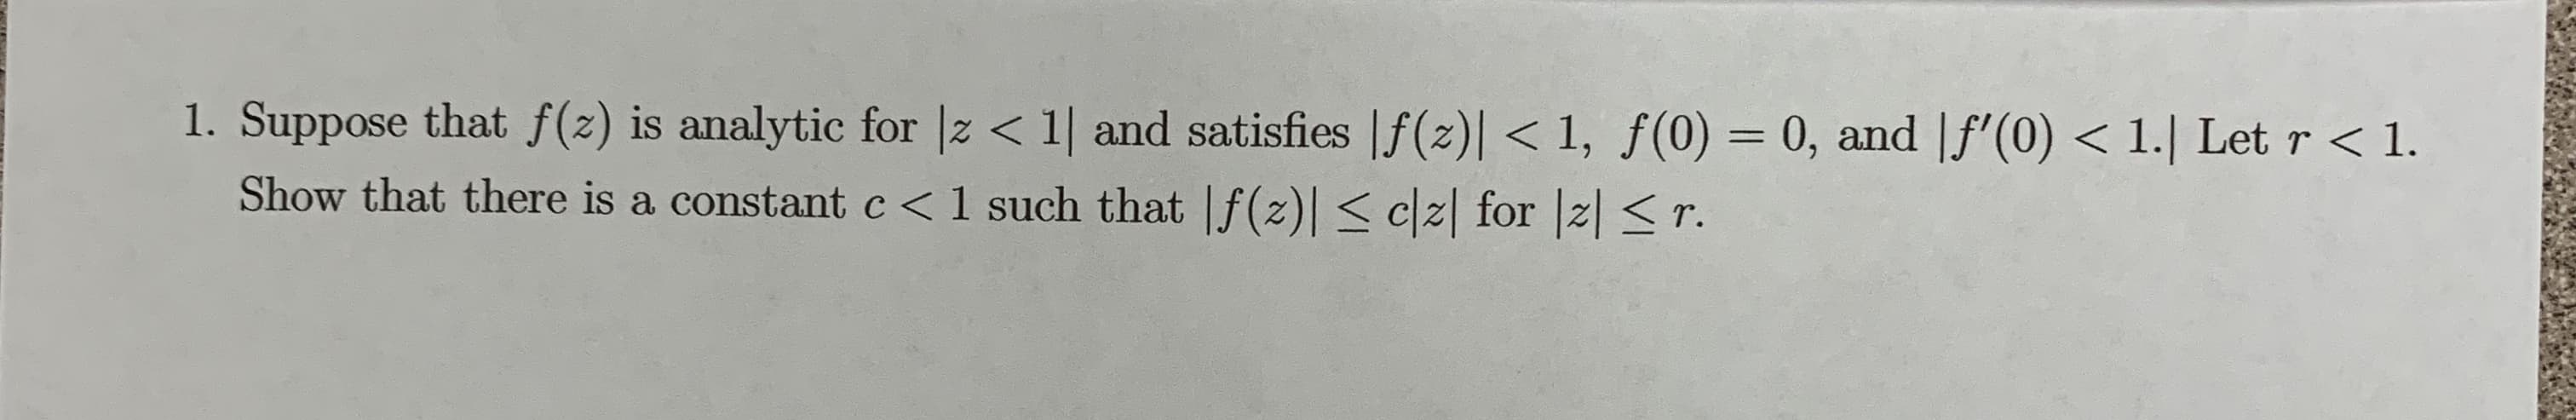 1. Suppose
that f(z) is analytic for lz <1 and sa
Show that there is a constant c < 1 such that |f(z)| < c
isfies |f(2)] <1, f(0) 0, and lf (0) < 1.] Let r <1.
for 리-r
